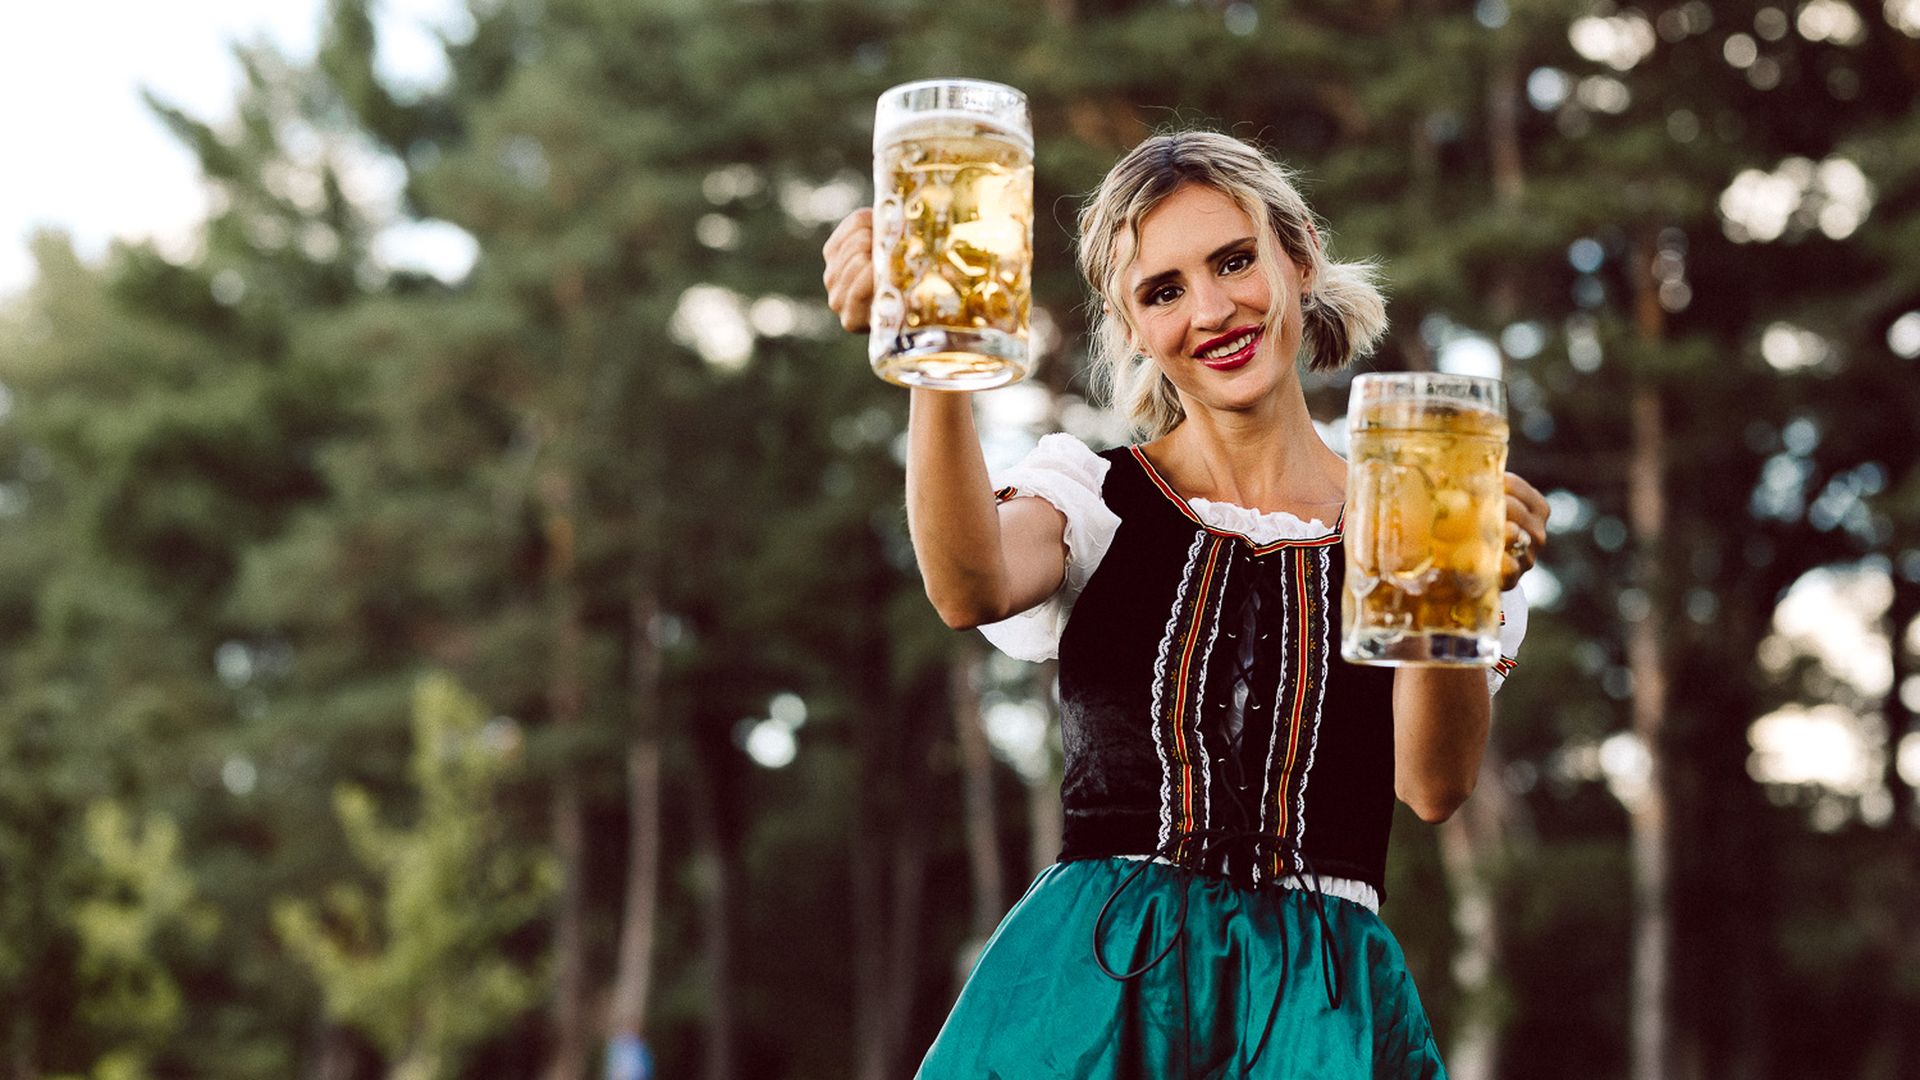 Lady holding beer steins